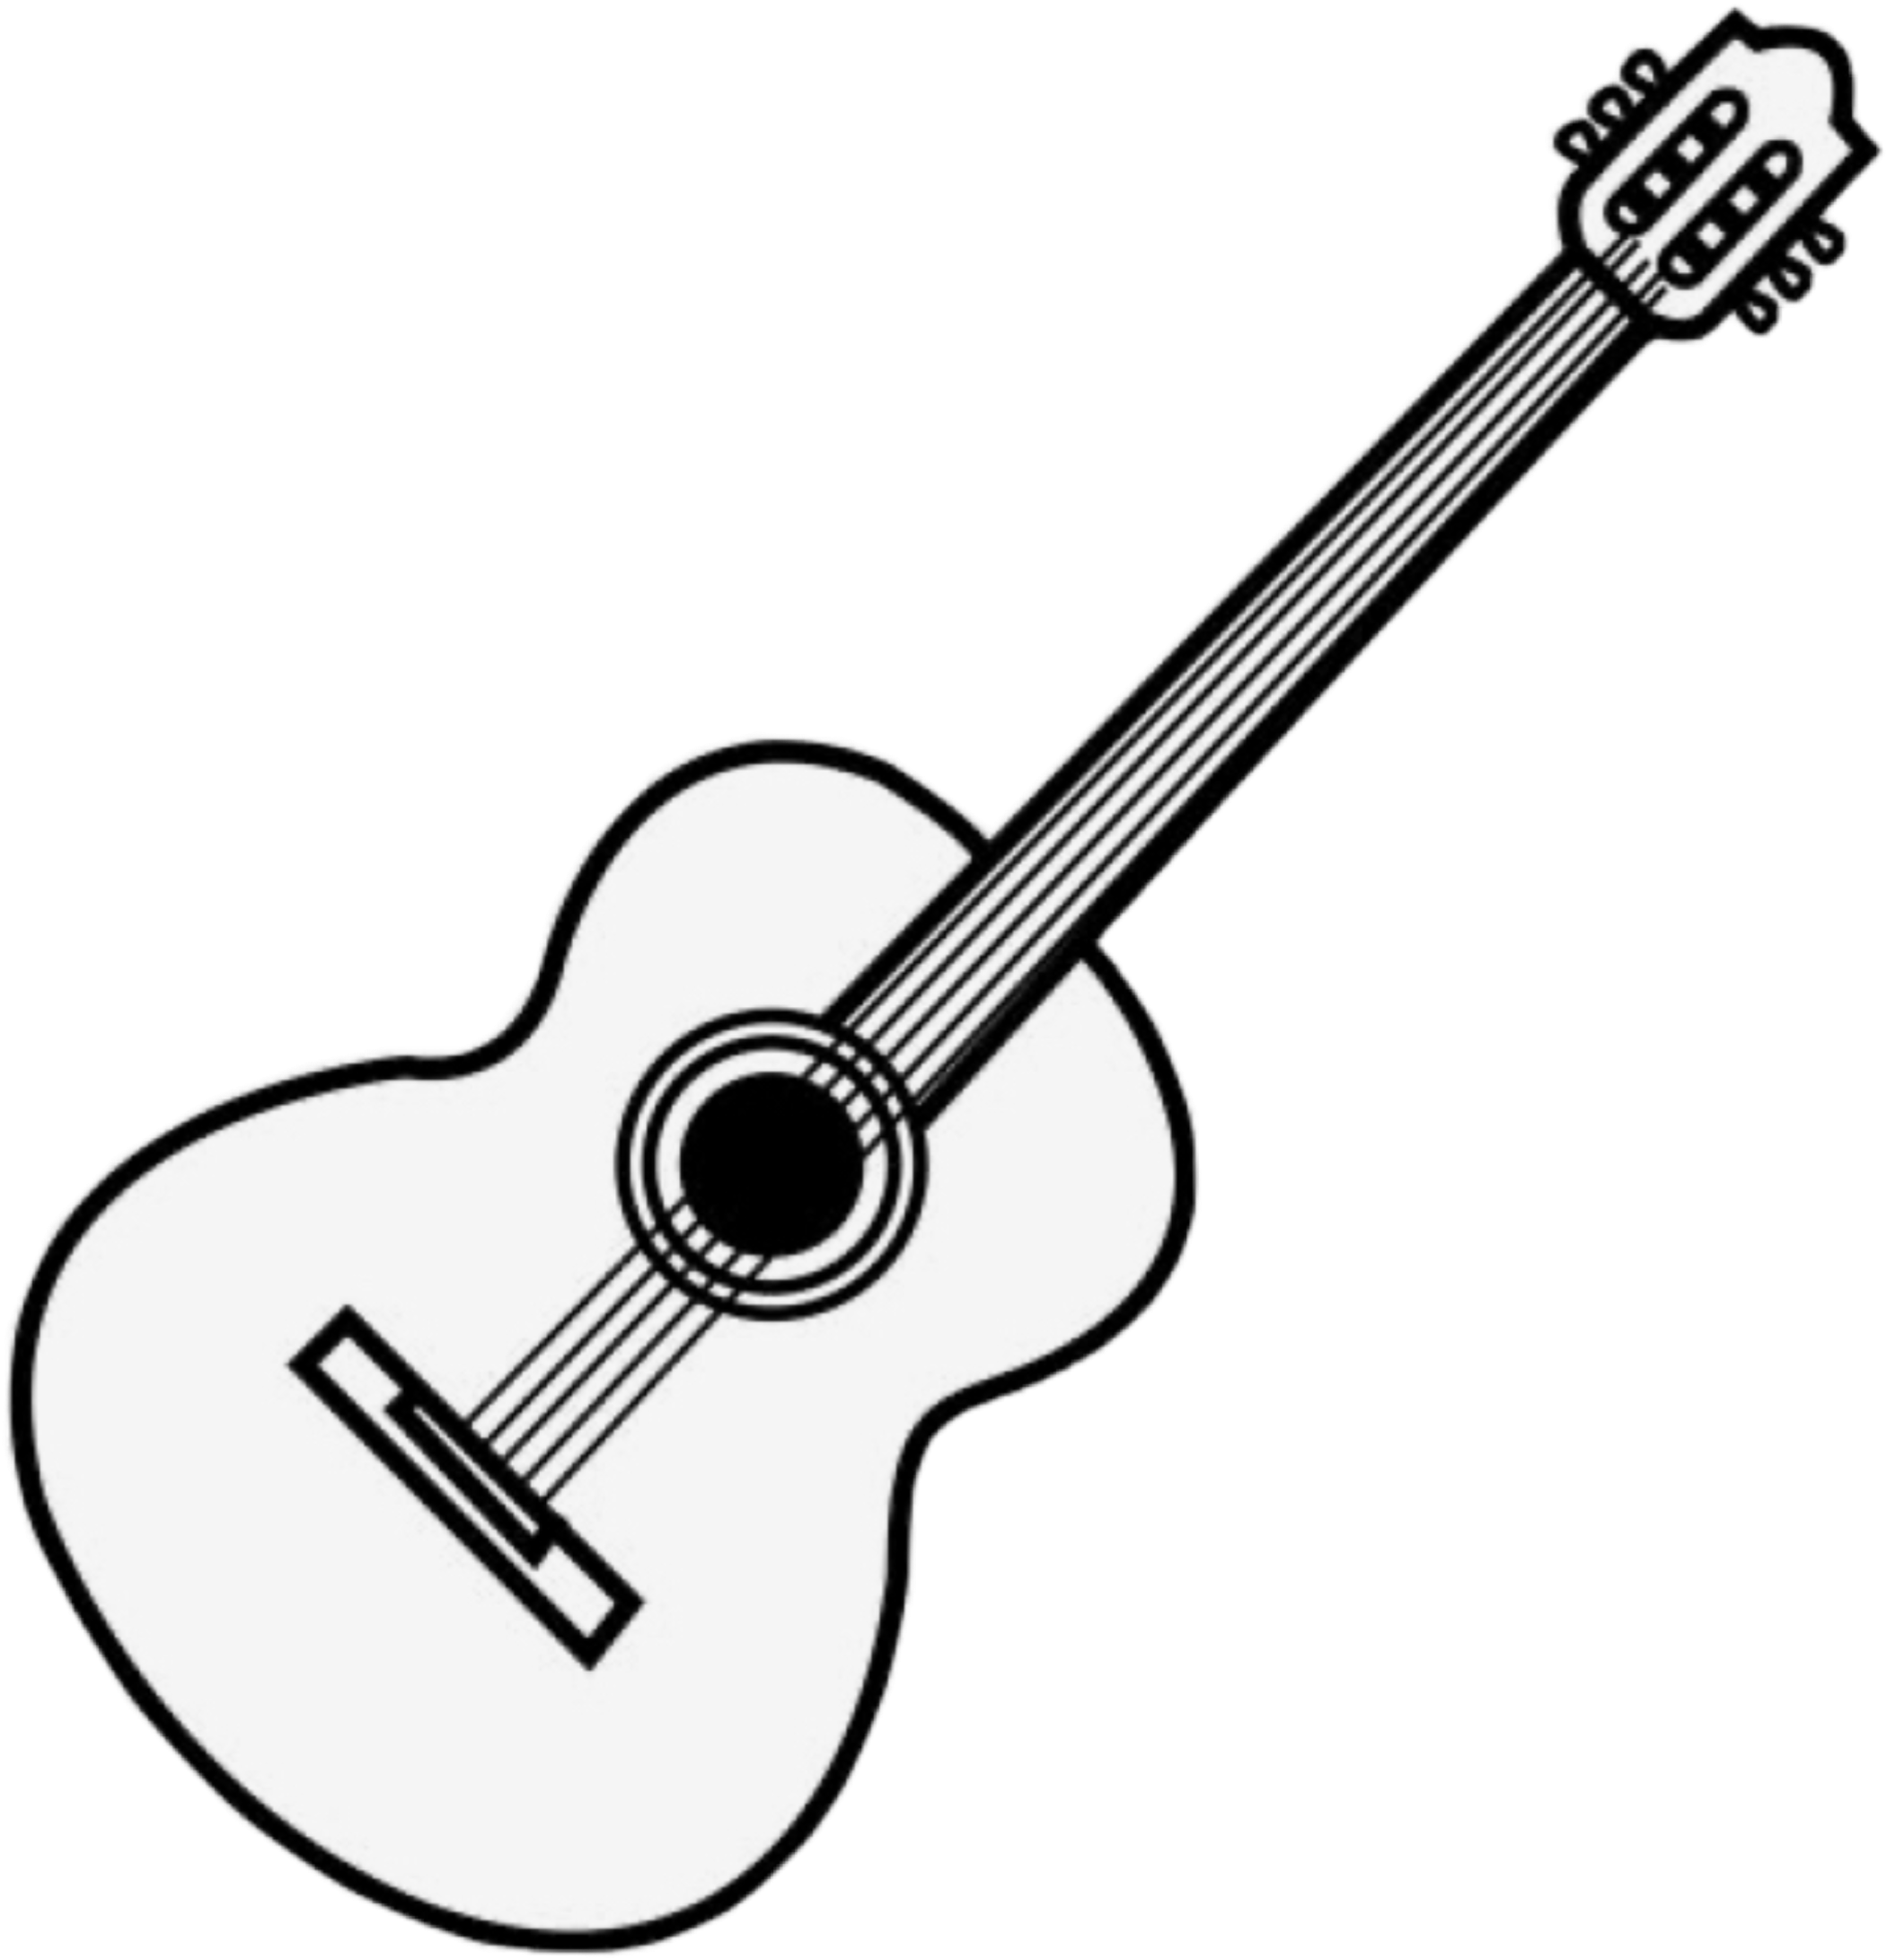 guitar freetoedit #guitar sticker by @sweethannahs.